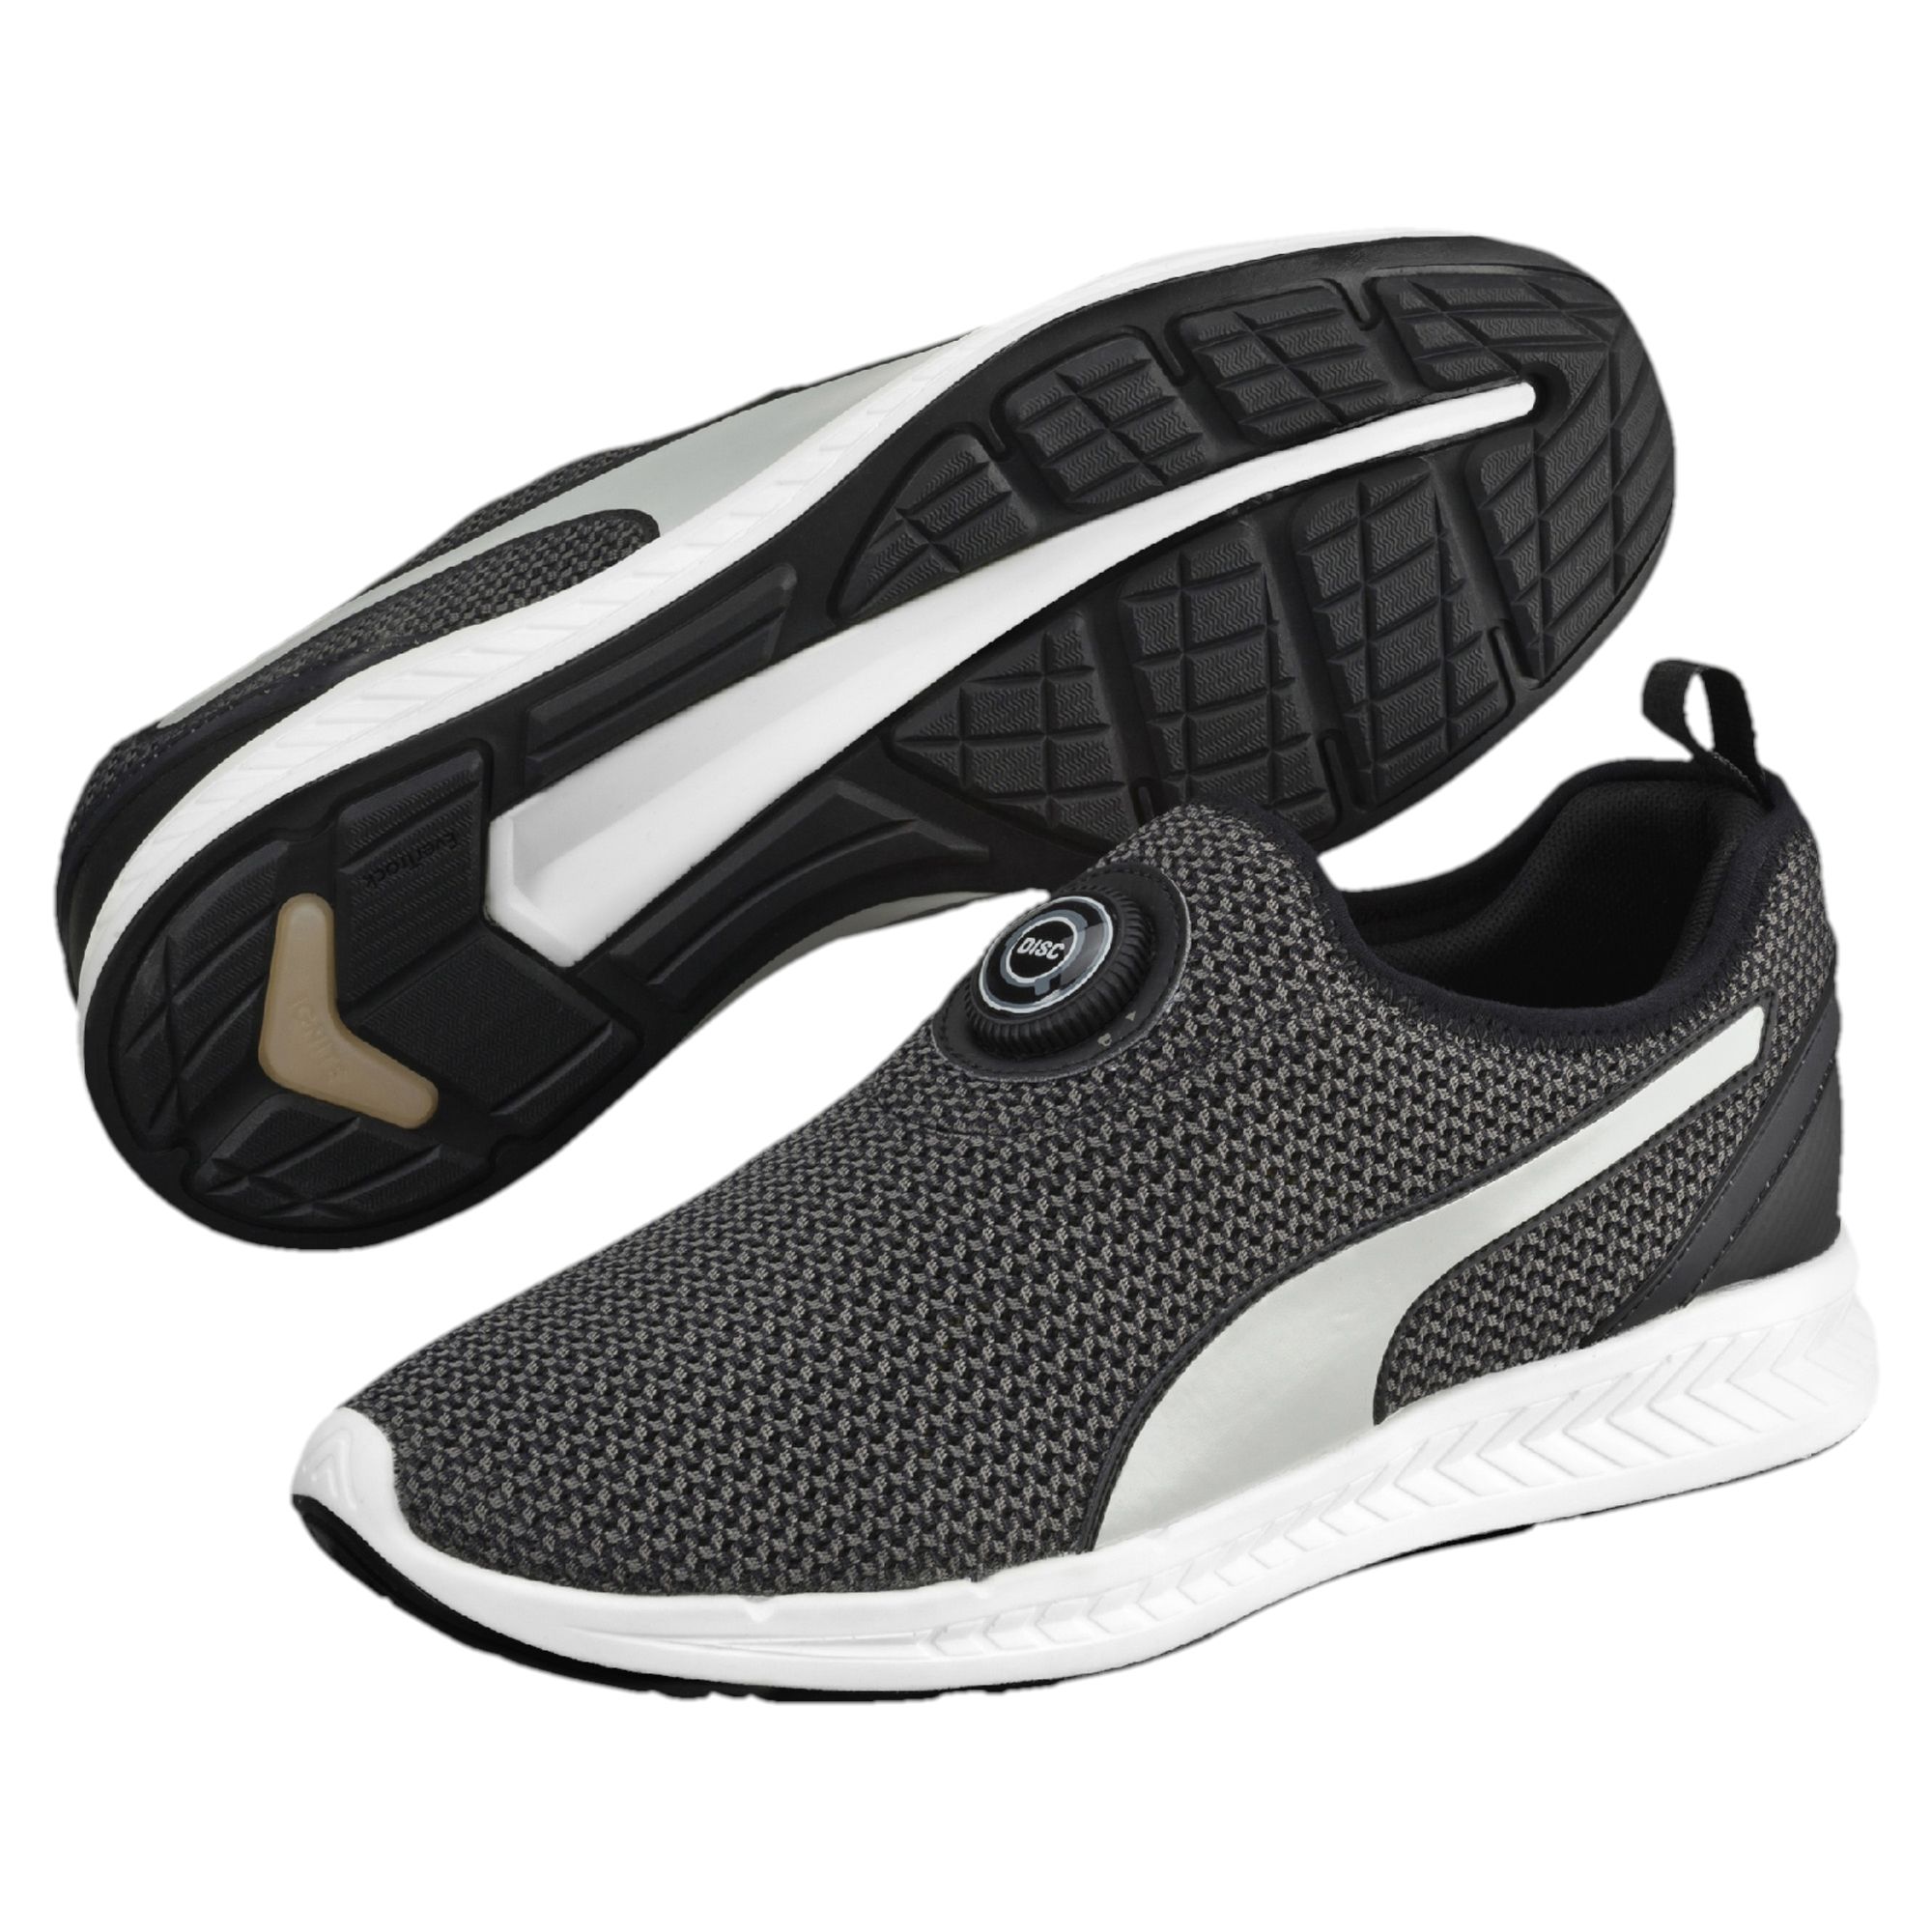 PUMA DISC Sleeve IGNITE Knit Trainers Low Boot Unisex New | eBay